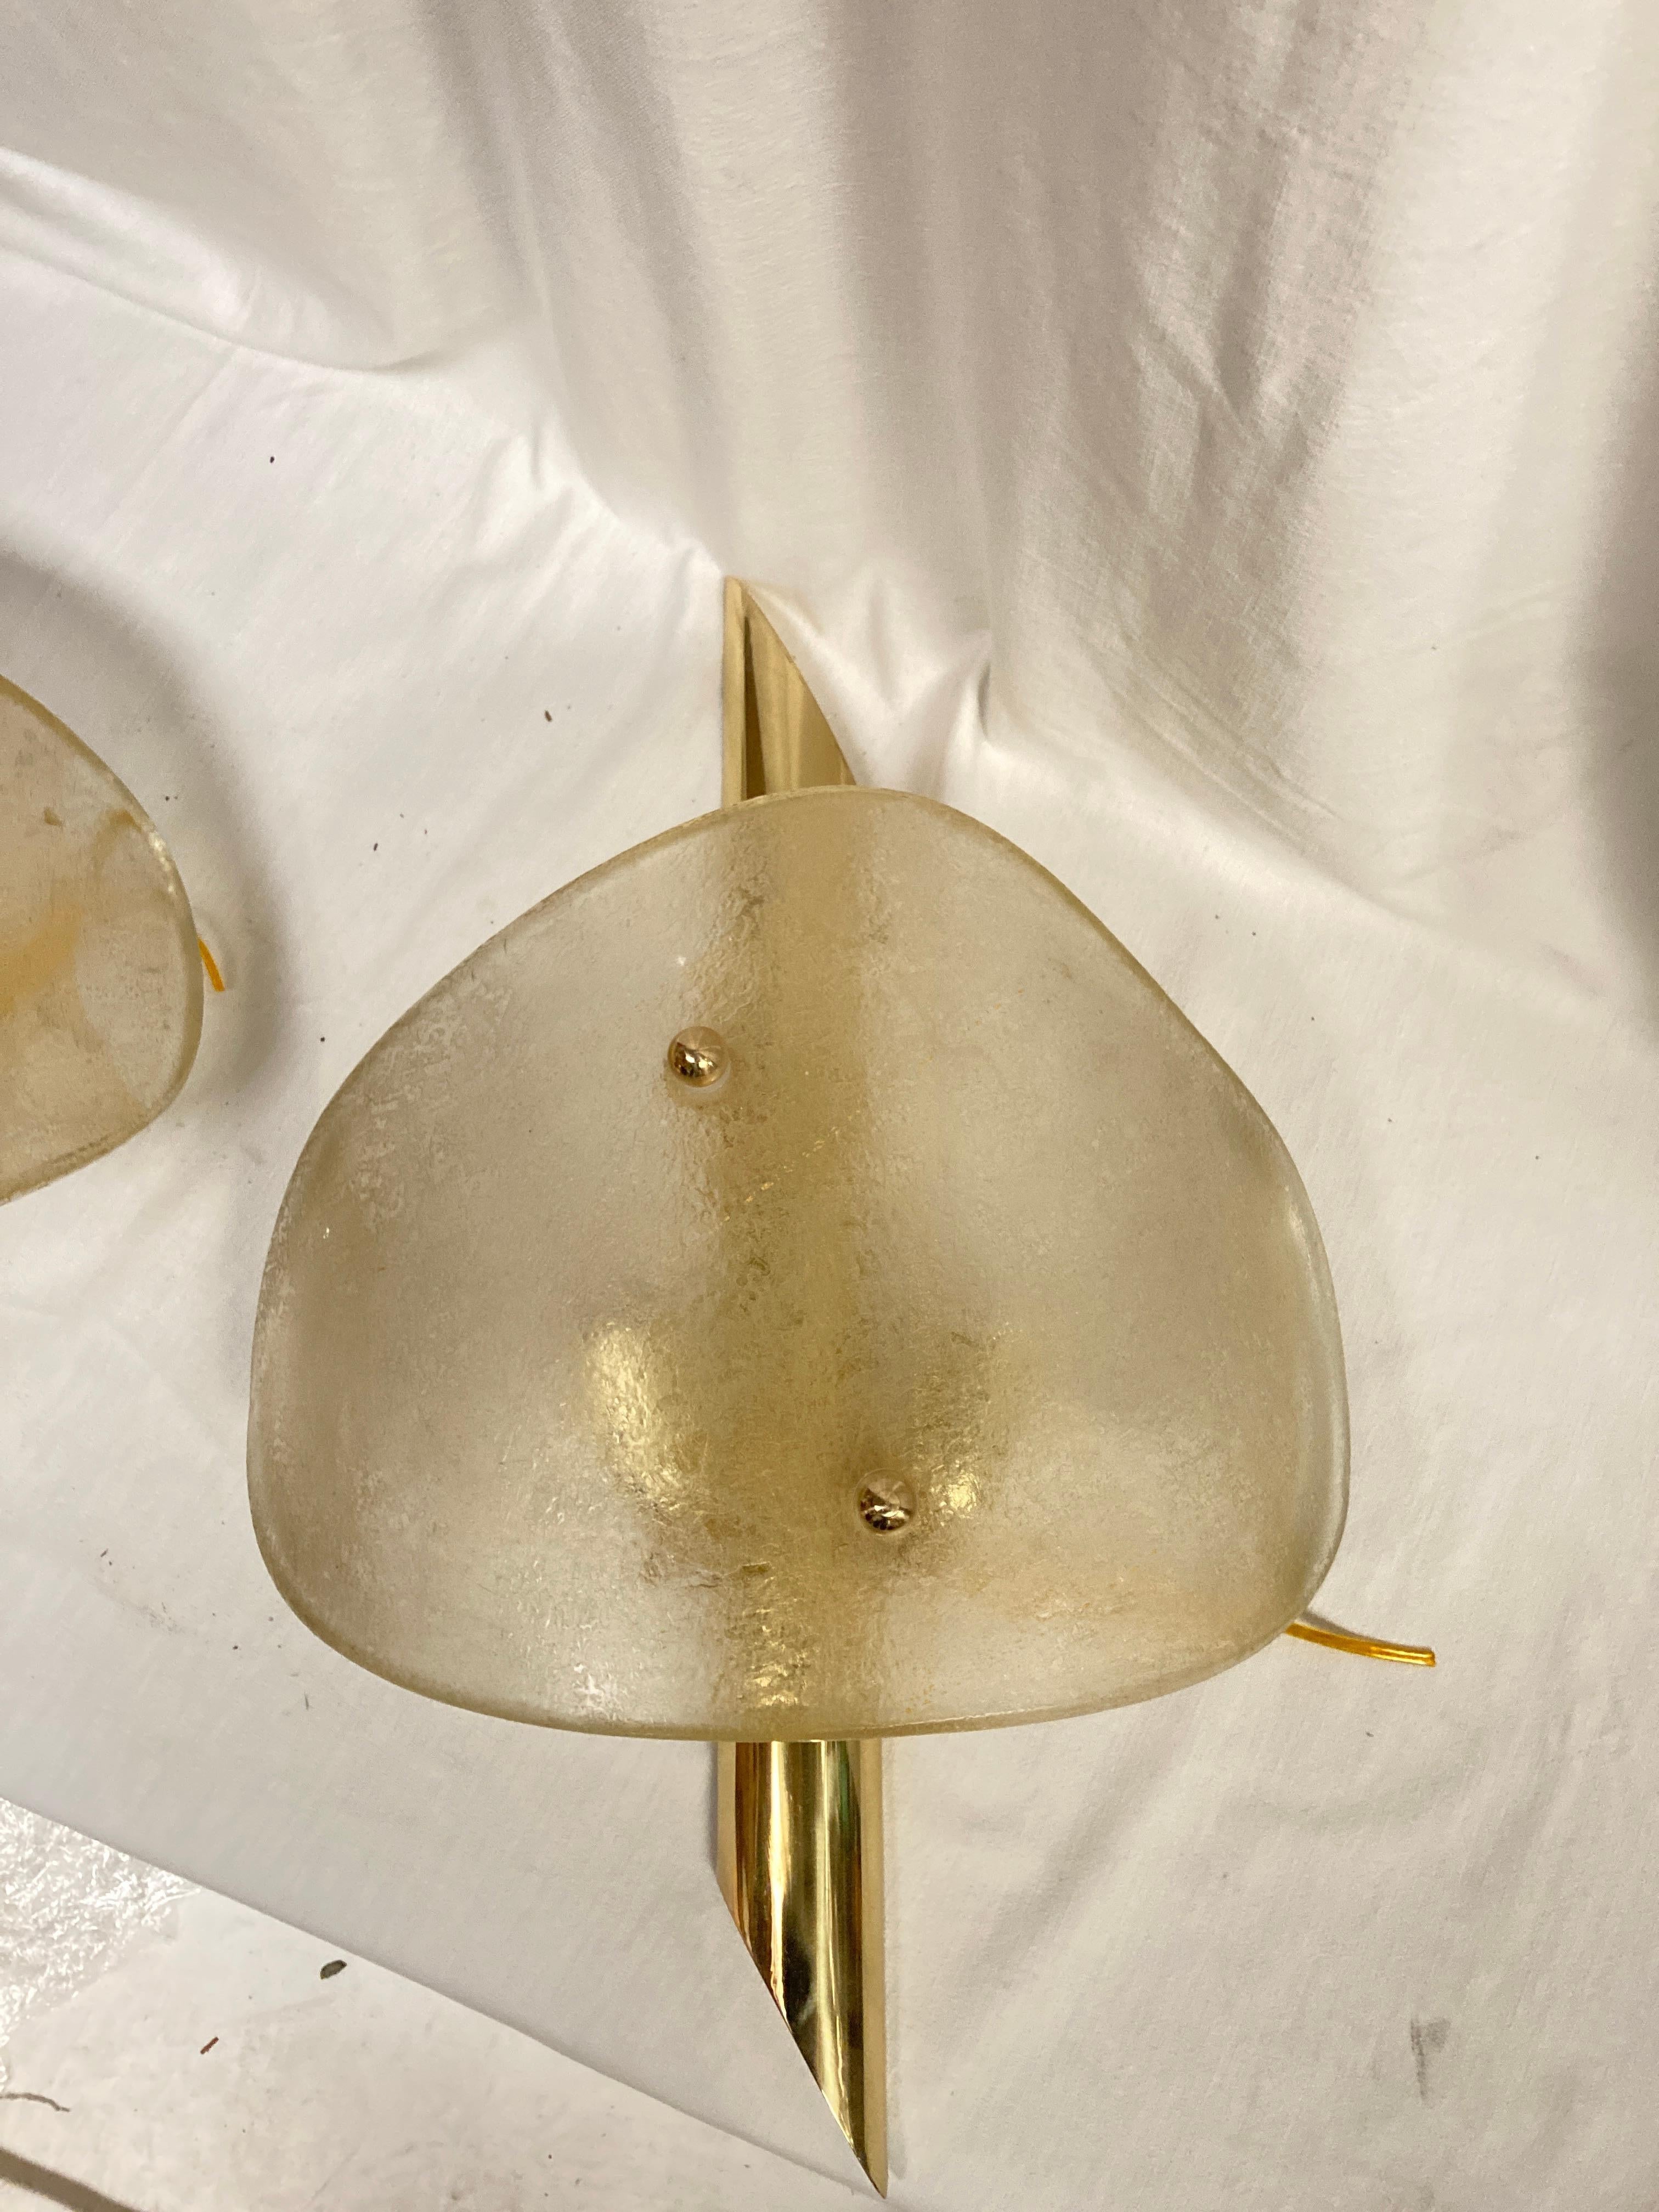 Rare pair of Murano glass sconces 
Shade with golden acid Murano glass
Polished brass fixture
Great condition